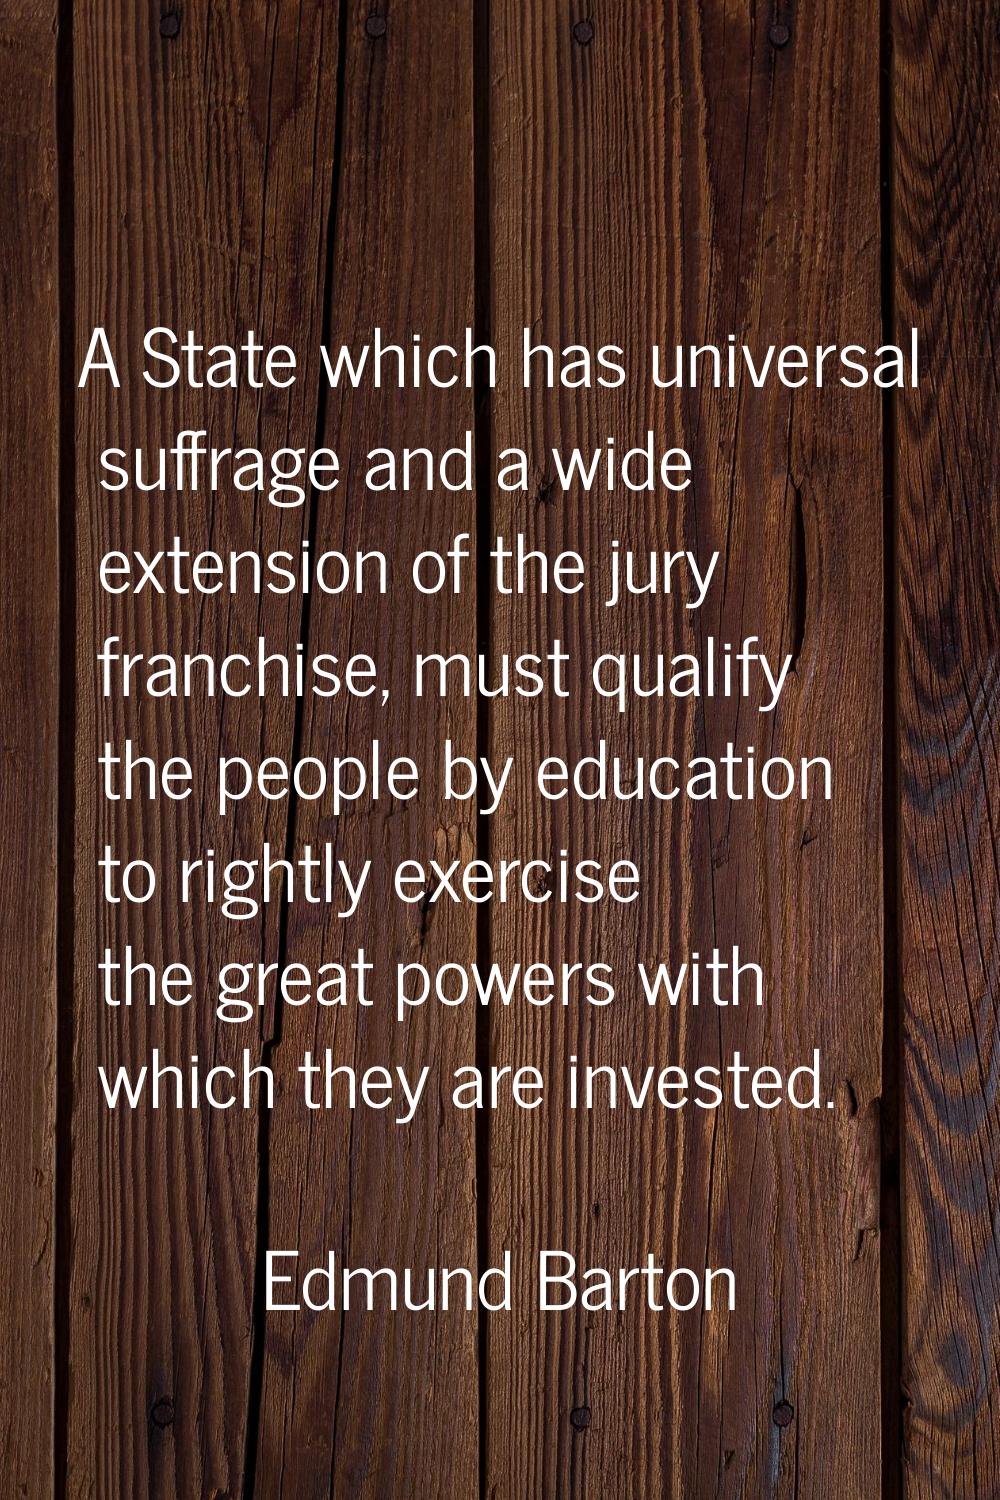 A State which has universal suffrage and a wide extension of the jury franchise, must qualify the p